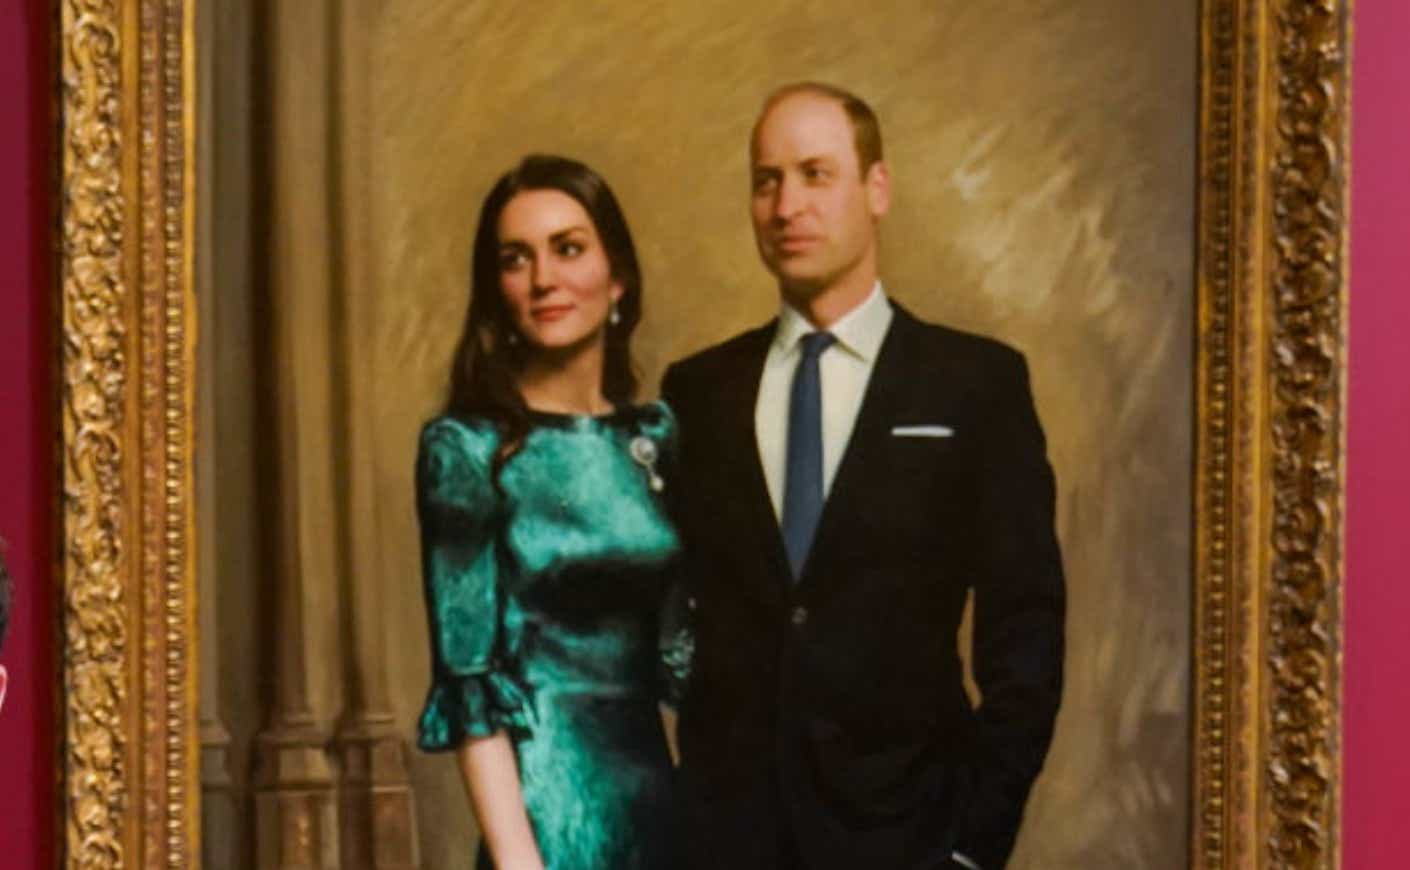 Portrait of Prince William and Katie Middleton by Jamie Coreth